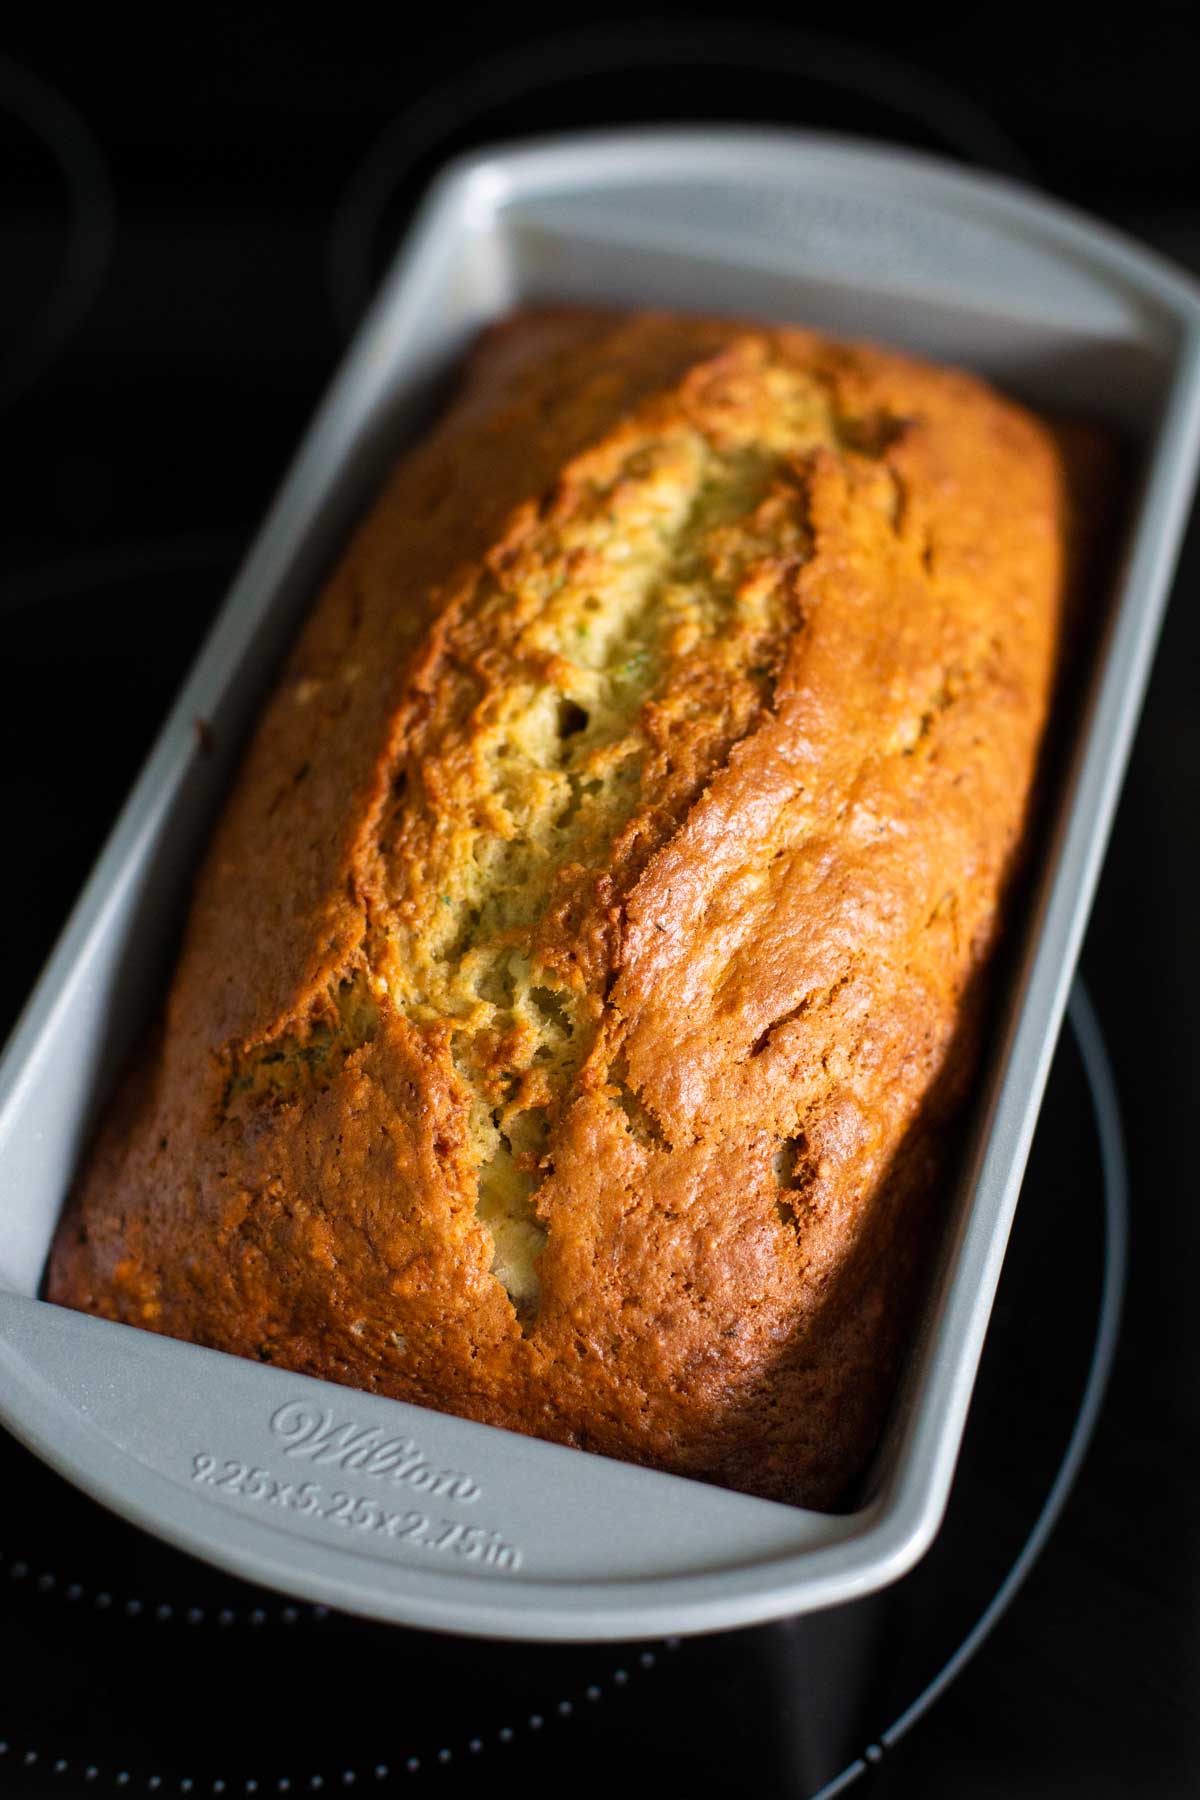 The banana zucchini bread is fresh out of the oven and cools on the stovetop.